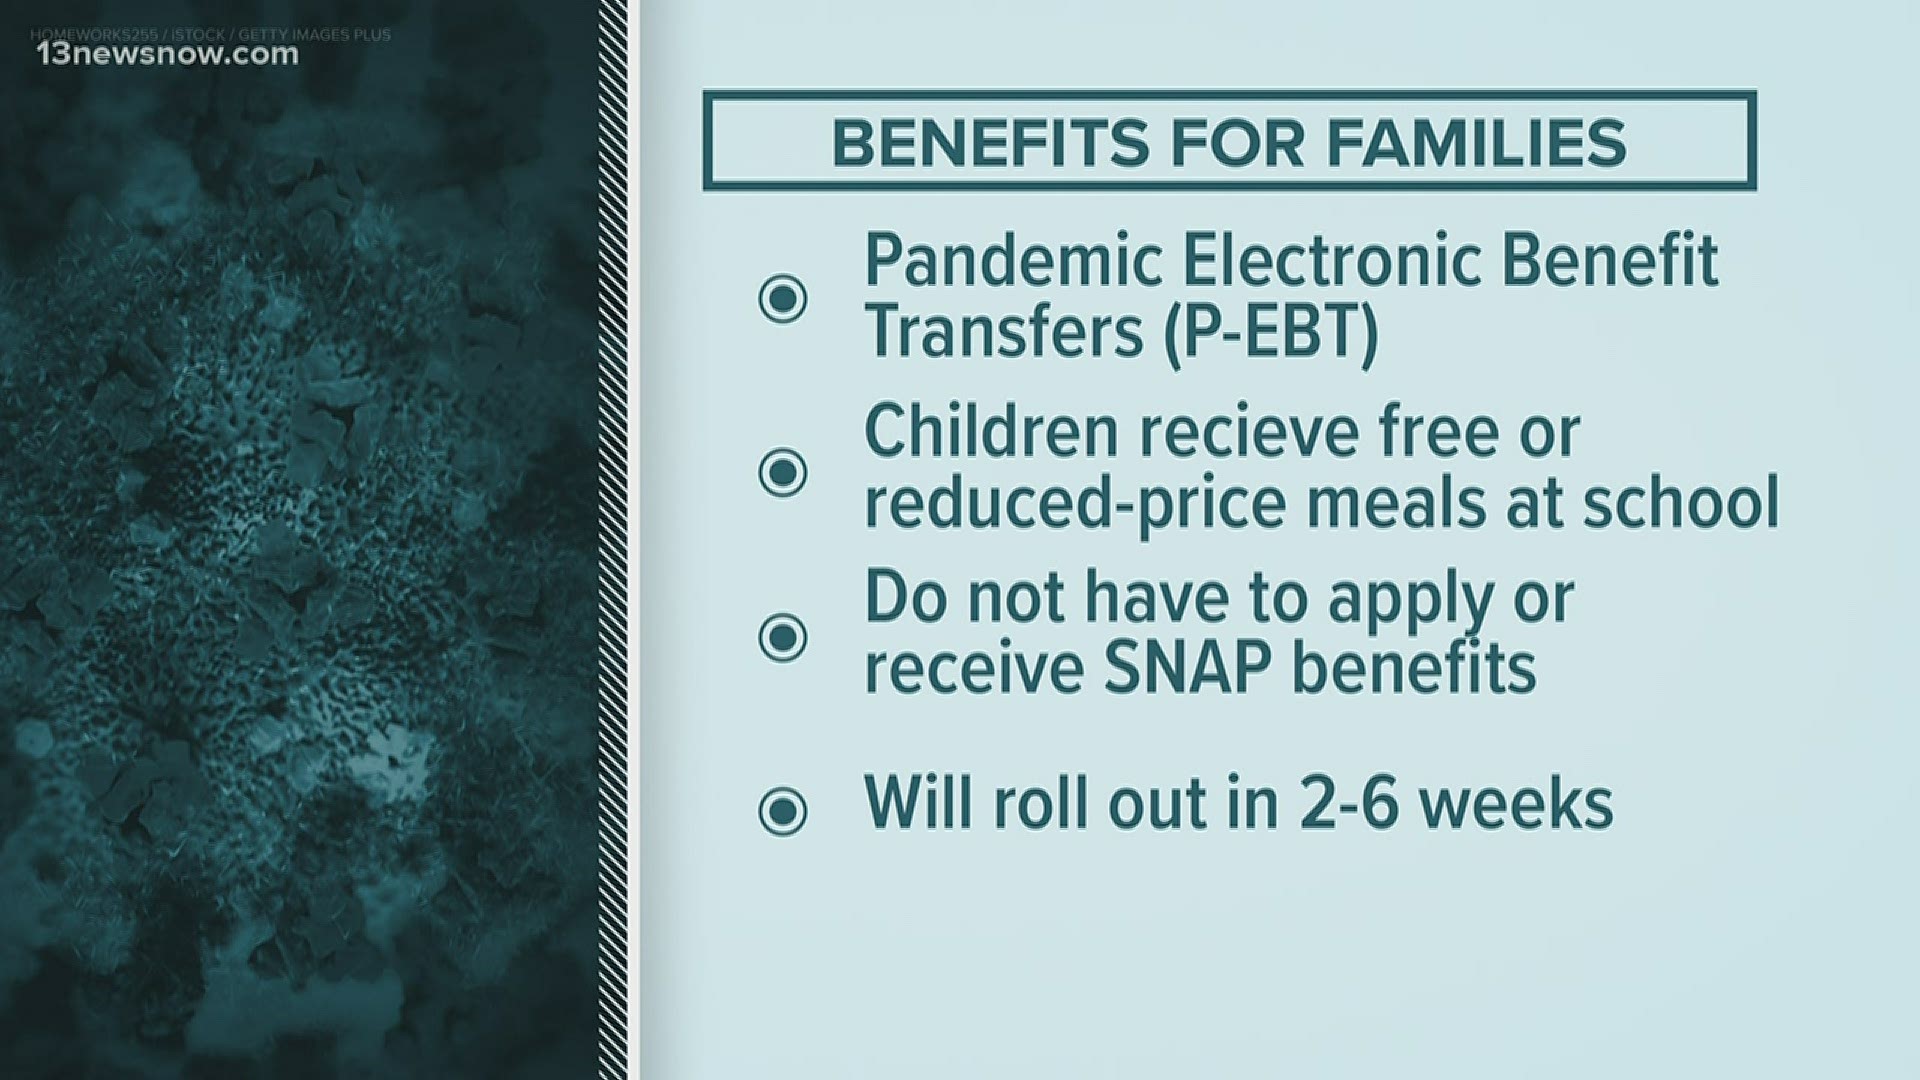 VDSS is offering P-EBT benefits to families of students who usually receive free meals at school.